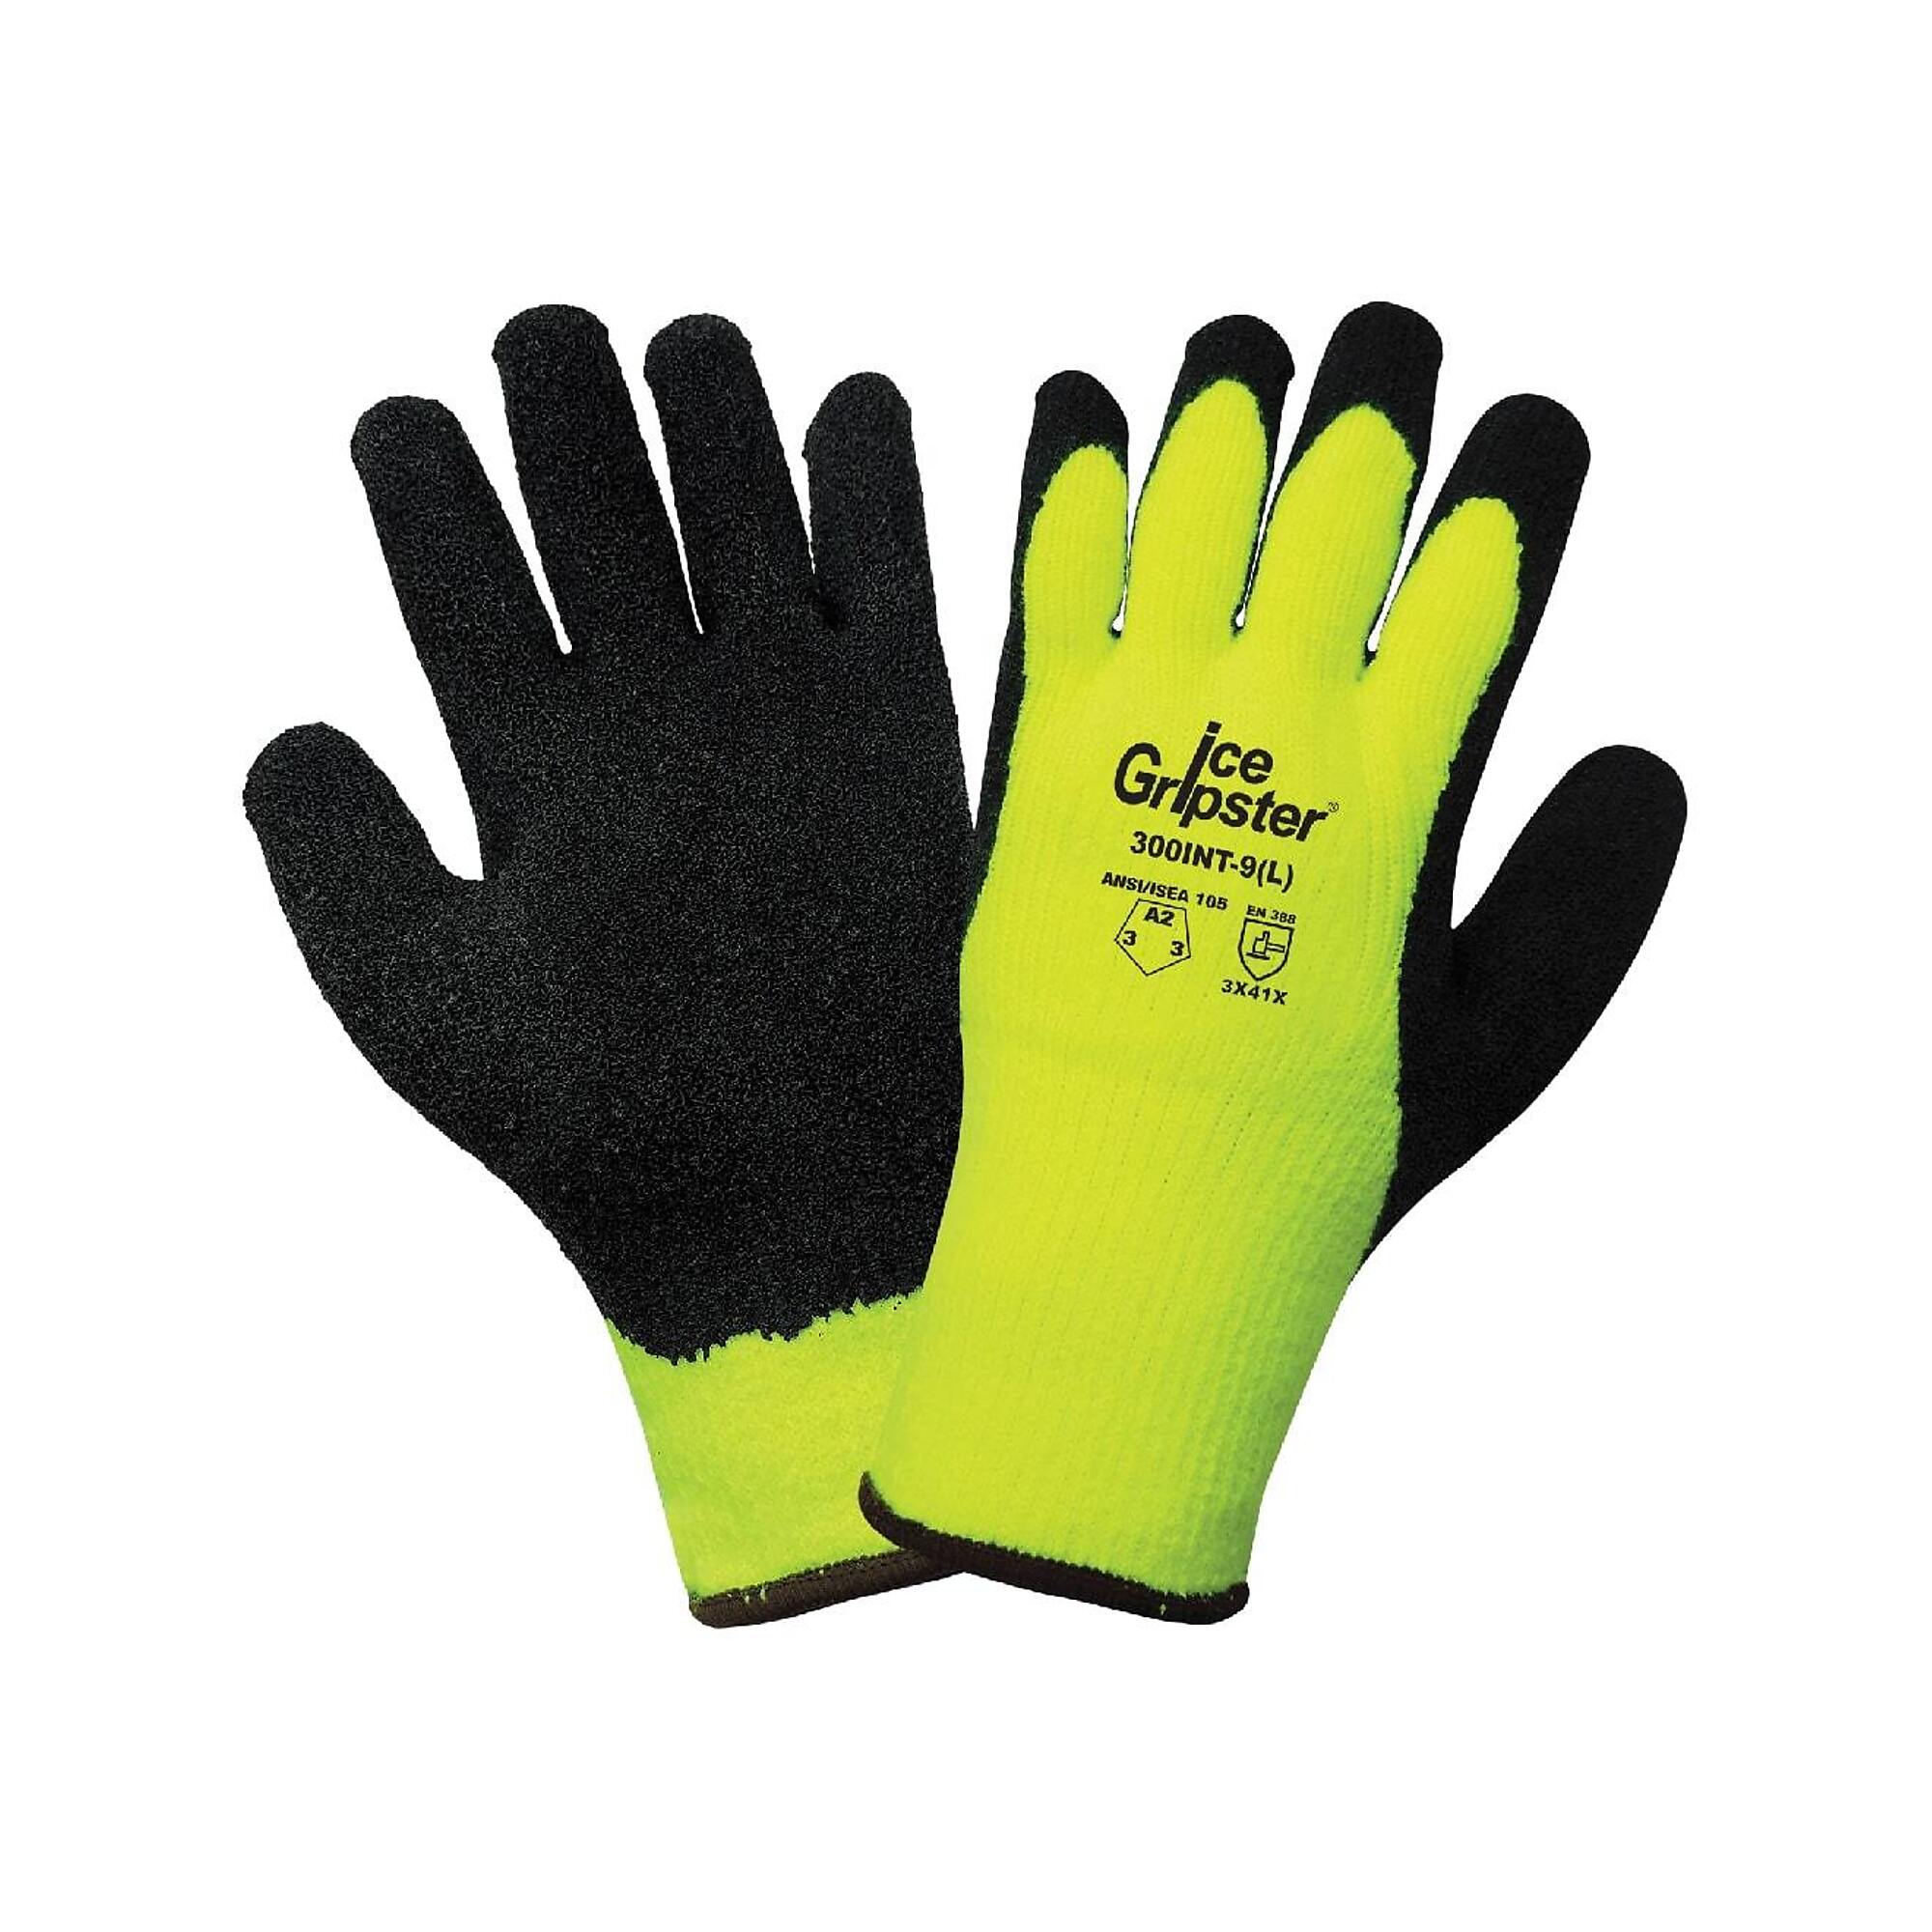 Global Glove Ice Gripster , HV Insulated, Wat-Resist, Rub Dip, Cut A2 Gloves - 12 Pairs, Size S, Color High-Visibility Yellow/Black, Included (qty.)